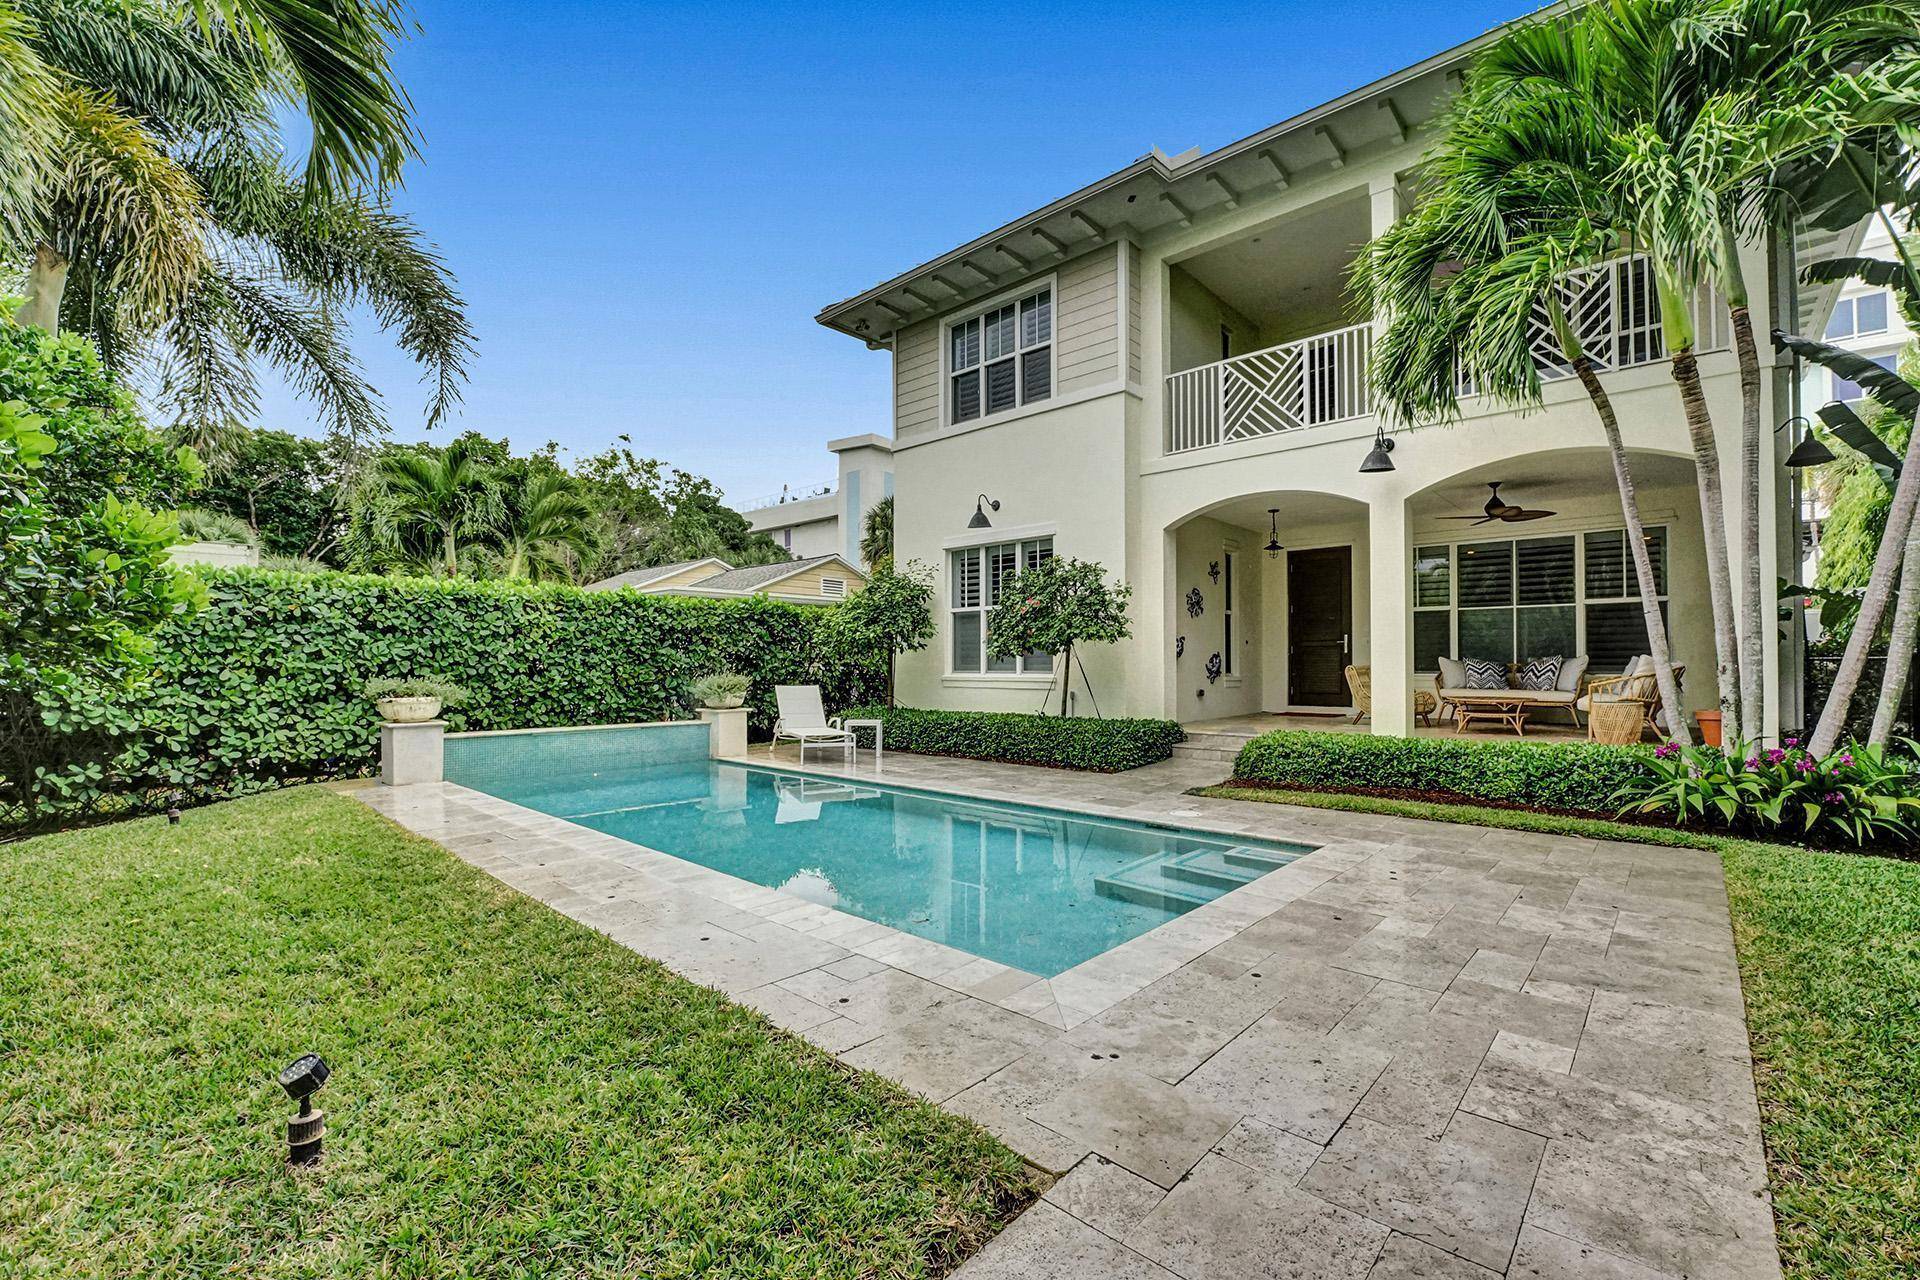 Furnished custom courtyard residence, close to the ocean and within one block of downtown Delray Beach, invites indoor outdoor living with two tropically landscaped patio areas, one with a sun ...